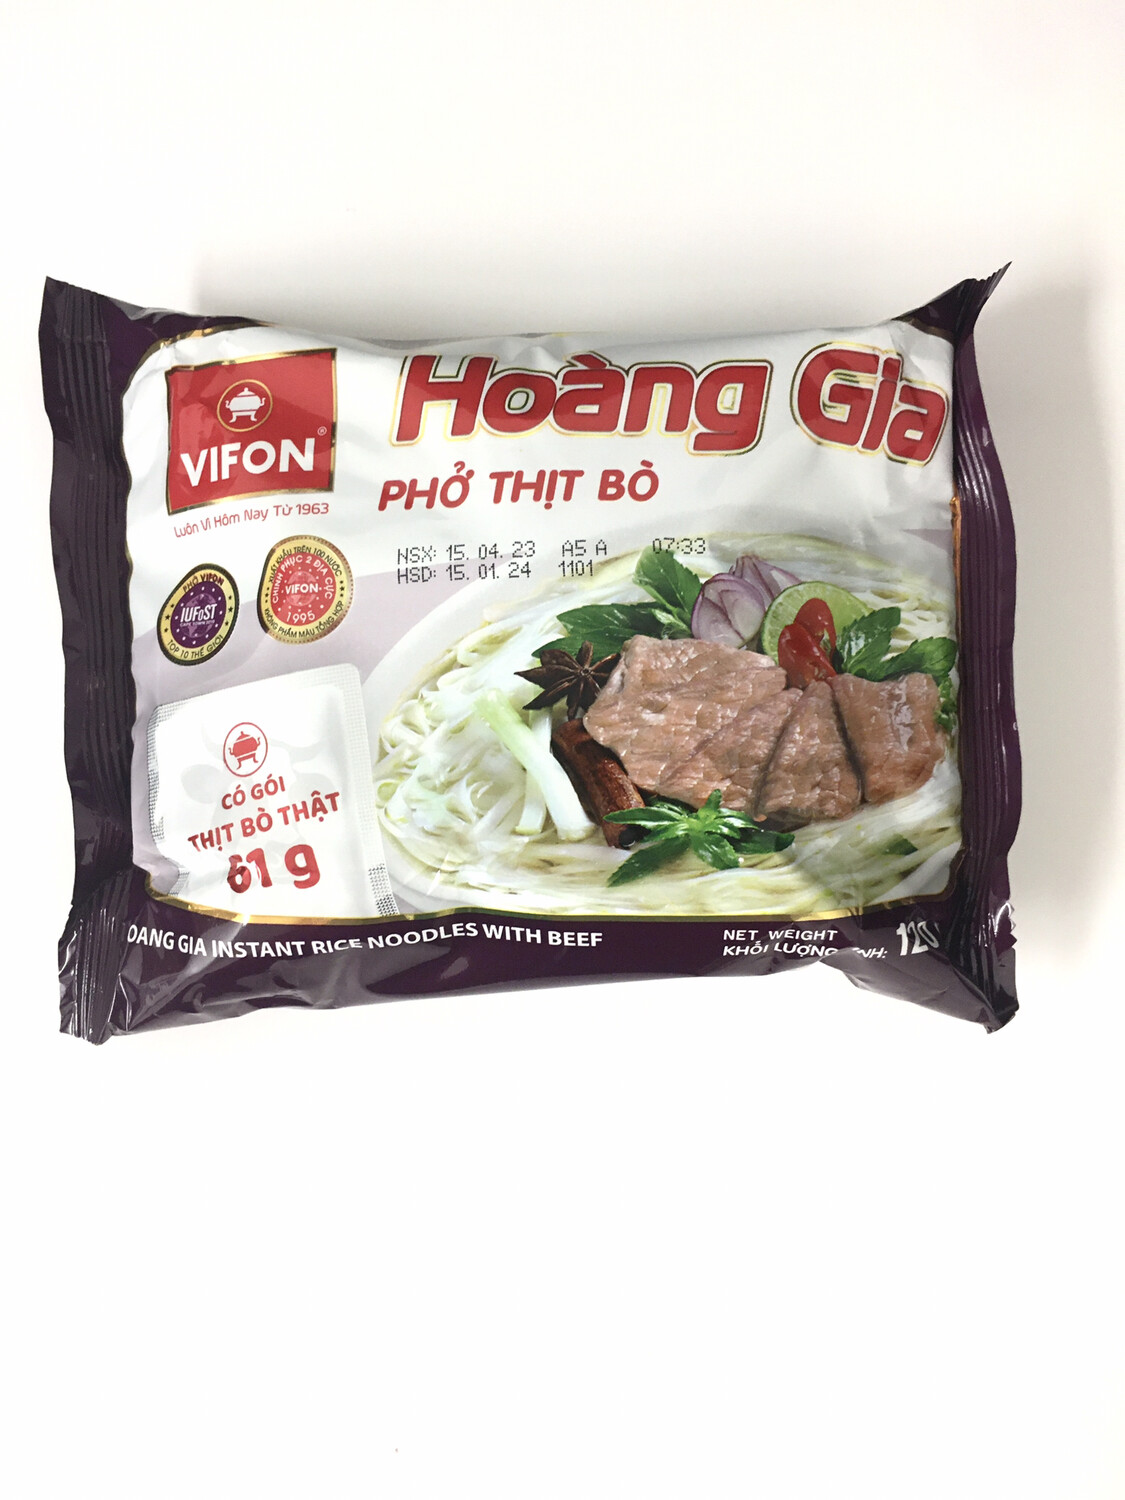 VIFON HOANG GIA INSTANT RICE NOODLES WITH BEEF PHO THIT BO 18X120G